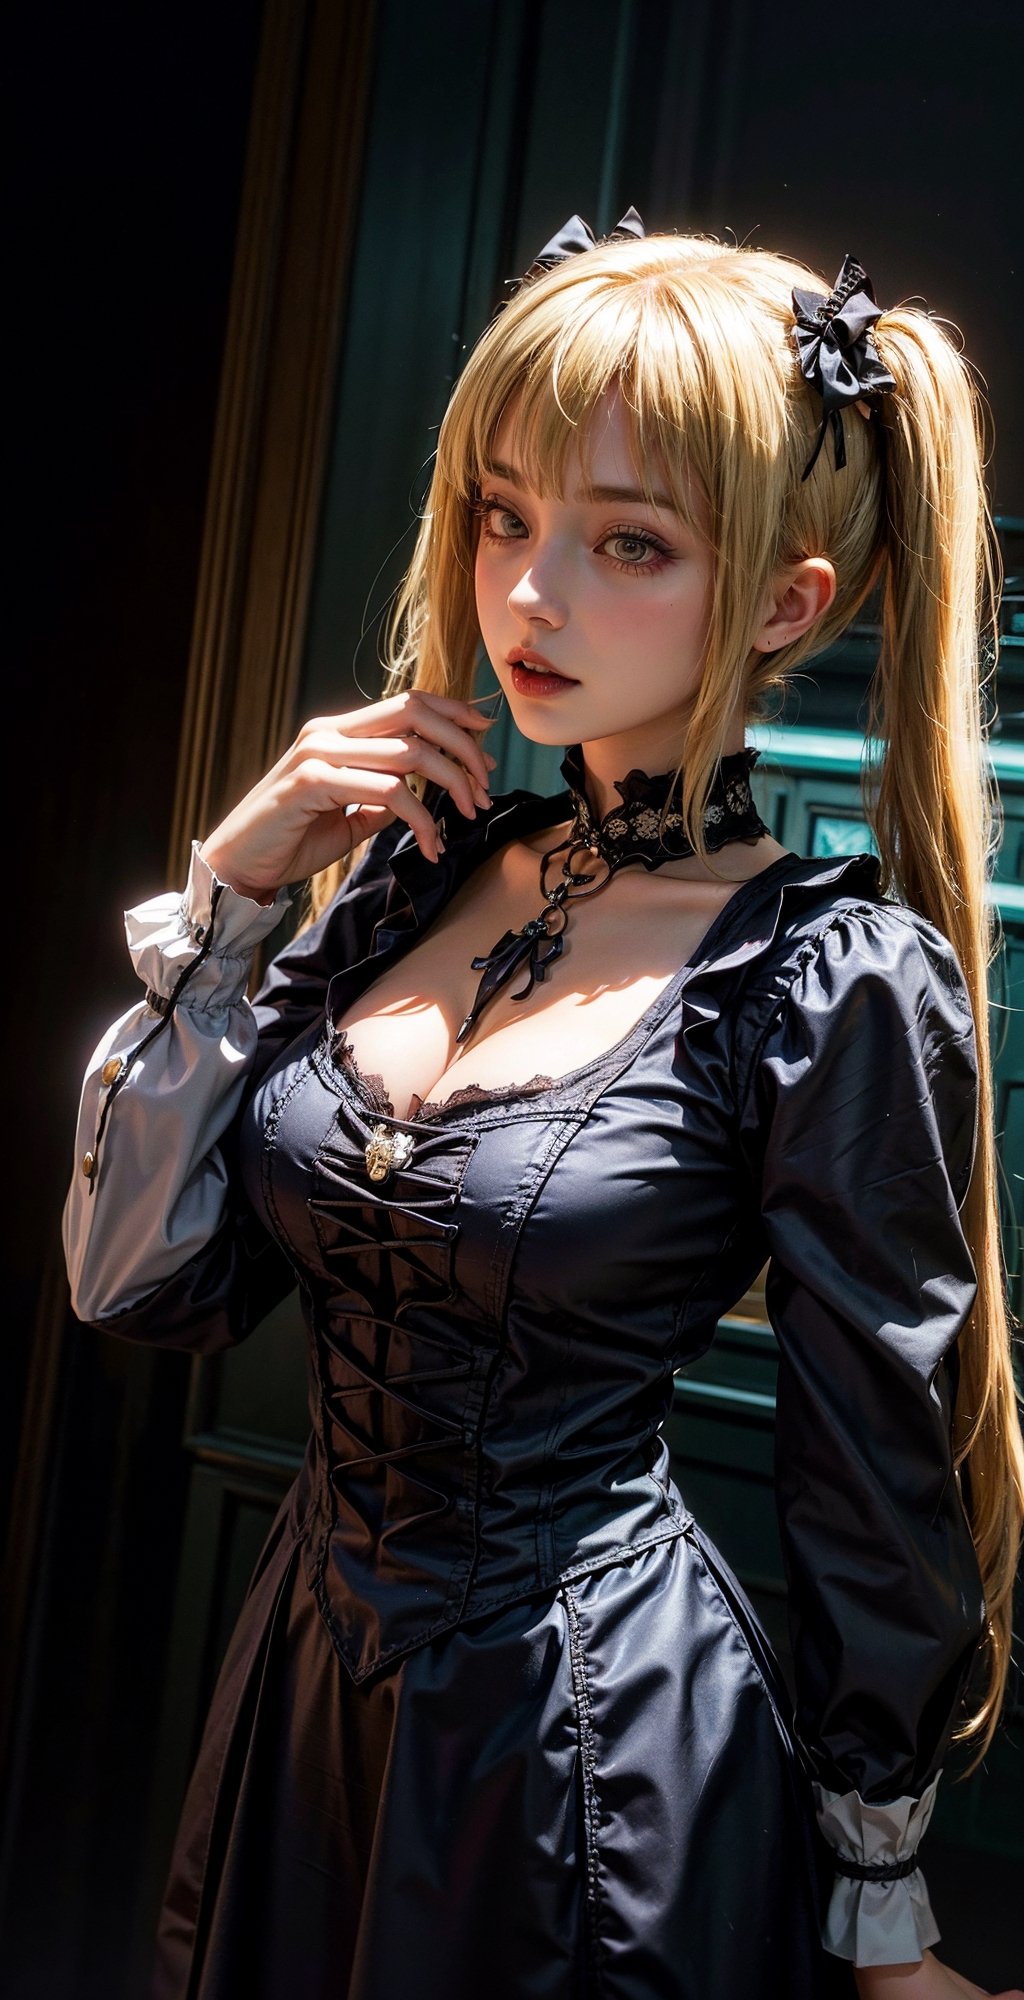 ((1mature lady:1.3, age of 45)), (standing on a dark street), (highway lights), (calm lighting), (night), sexy pose, (very delicate and beautiful work), (masterpiece), one girl, ((wearing in a gothic Lolita dress:1.37, gothic Lolita fashion:1.5)), very detailed and leaky waist, attractive look, beautifully clear eyes, ((blonde twin-tails hair:1.5)), delicate necklace, delicate earrings, simple blurred background, extreme detailed description, beautiful, attractive, Super fine painting, pretty face, big, big, big, big, fine body, fine collarbone, beautiful lips, smooth ass, mix4, (8k, RAW photo, top quality, masterpiece: 1.37), (realistic, realistic: 1.37), one girl, cute, cityscape, night, humidity, professional lighting, photon mapping, radiation, physics cs-based rendering,makima